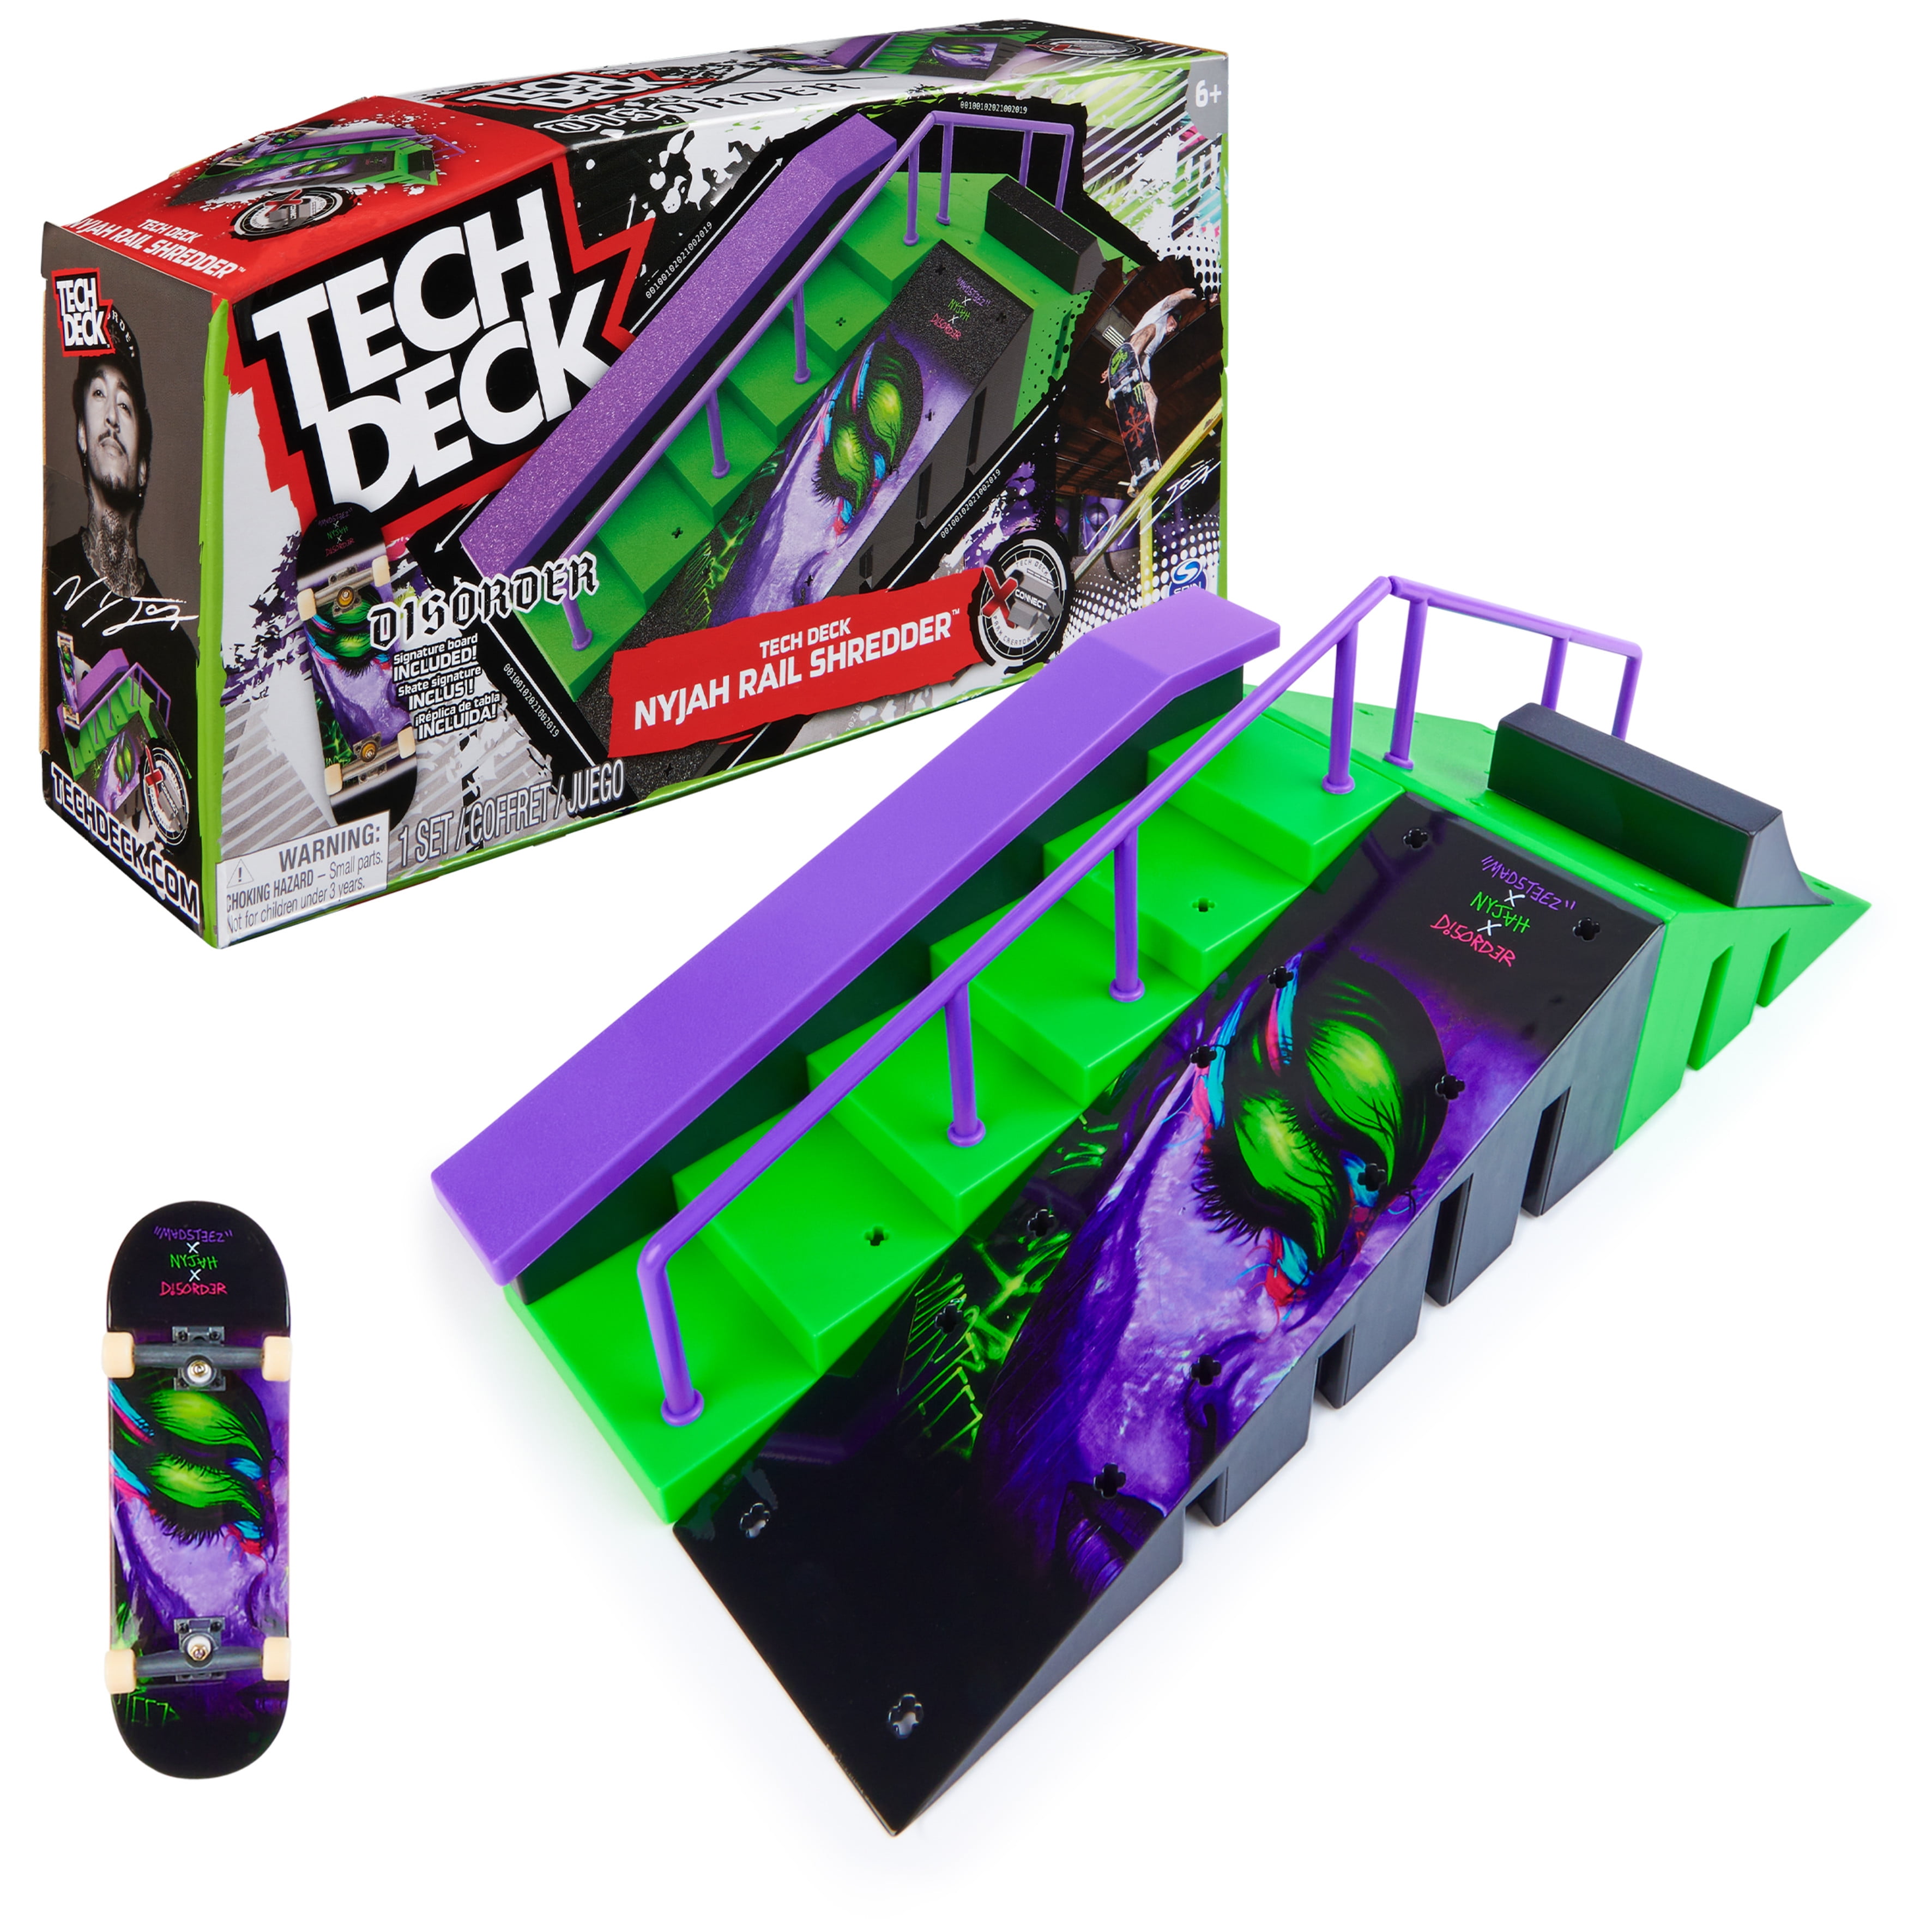 Tech Deck, Nyjah Skatepark X-Connect Park Creator, Massive Customizable  Skatepark Ramp Set with Exclusive Fingerboard, Kids Toy for Ages 6 and up